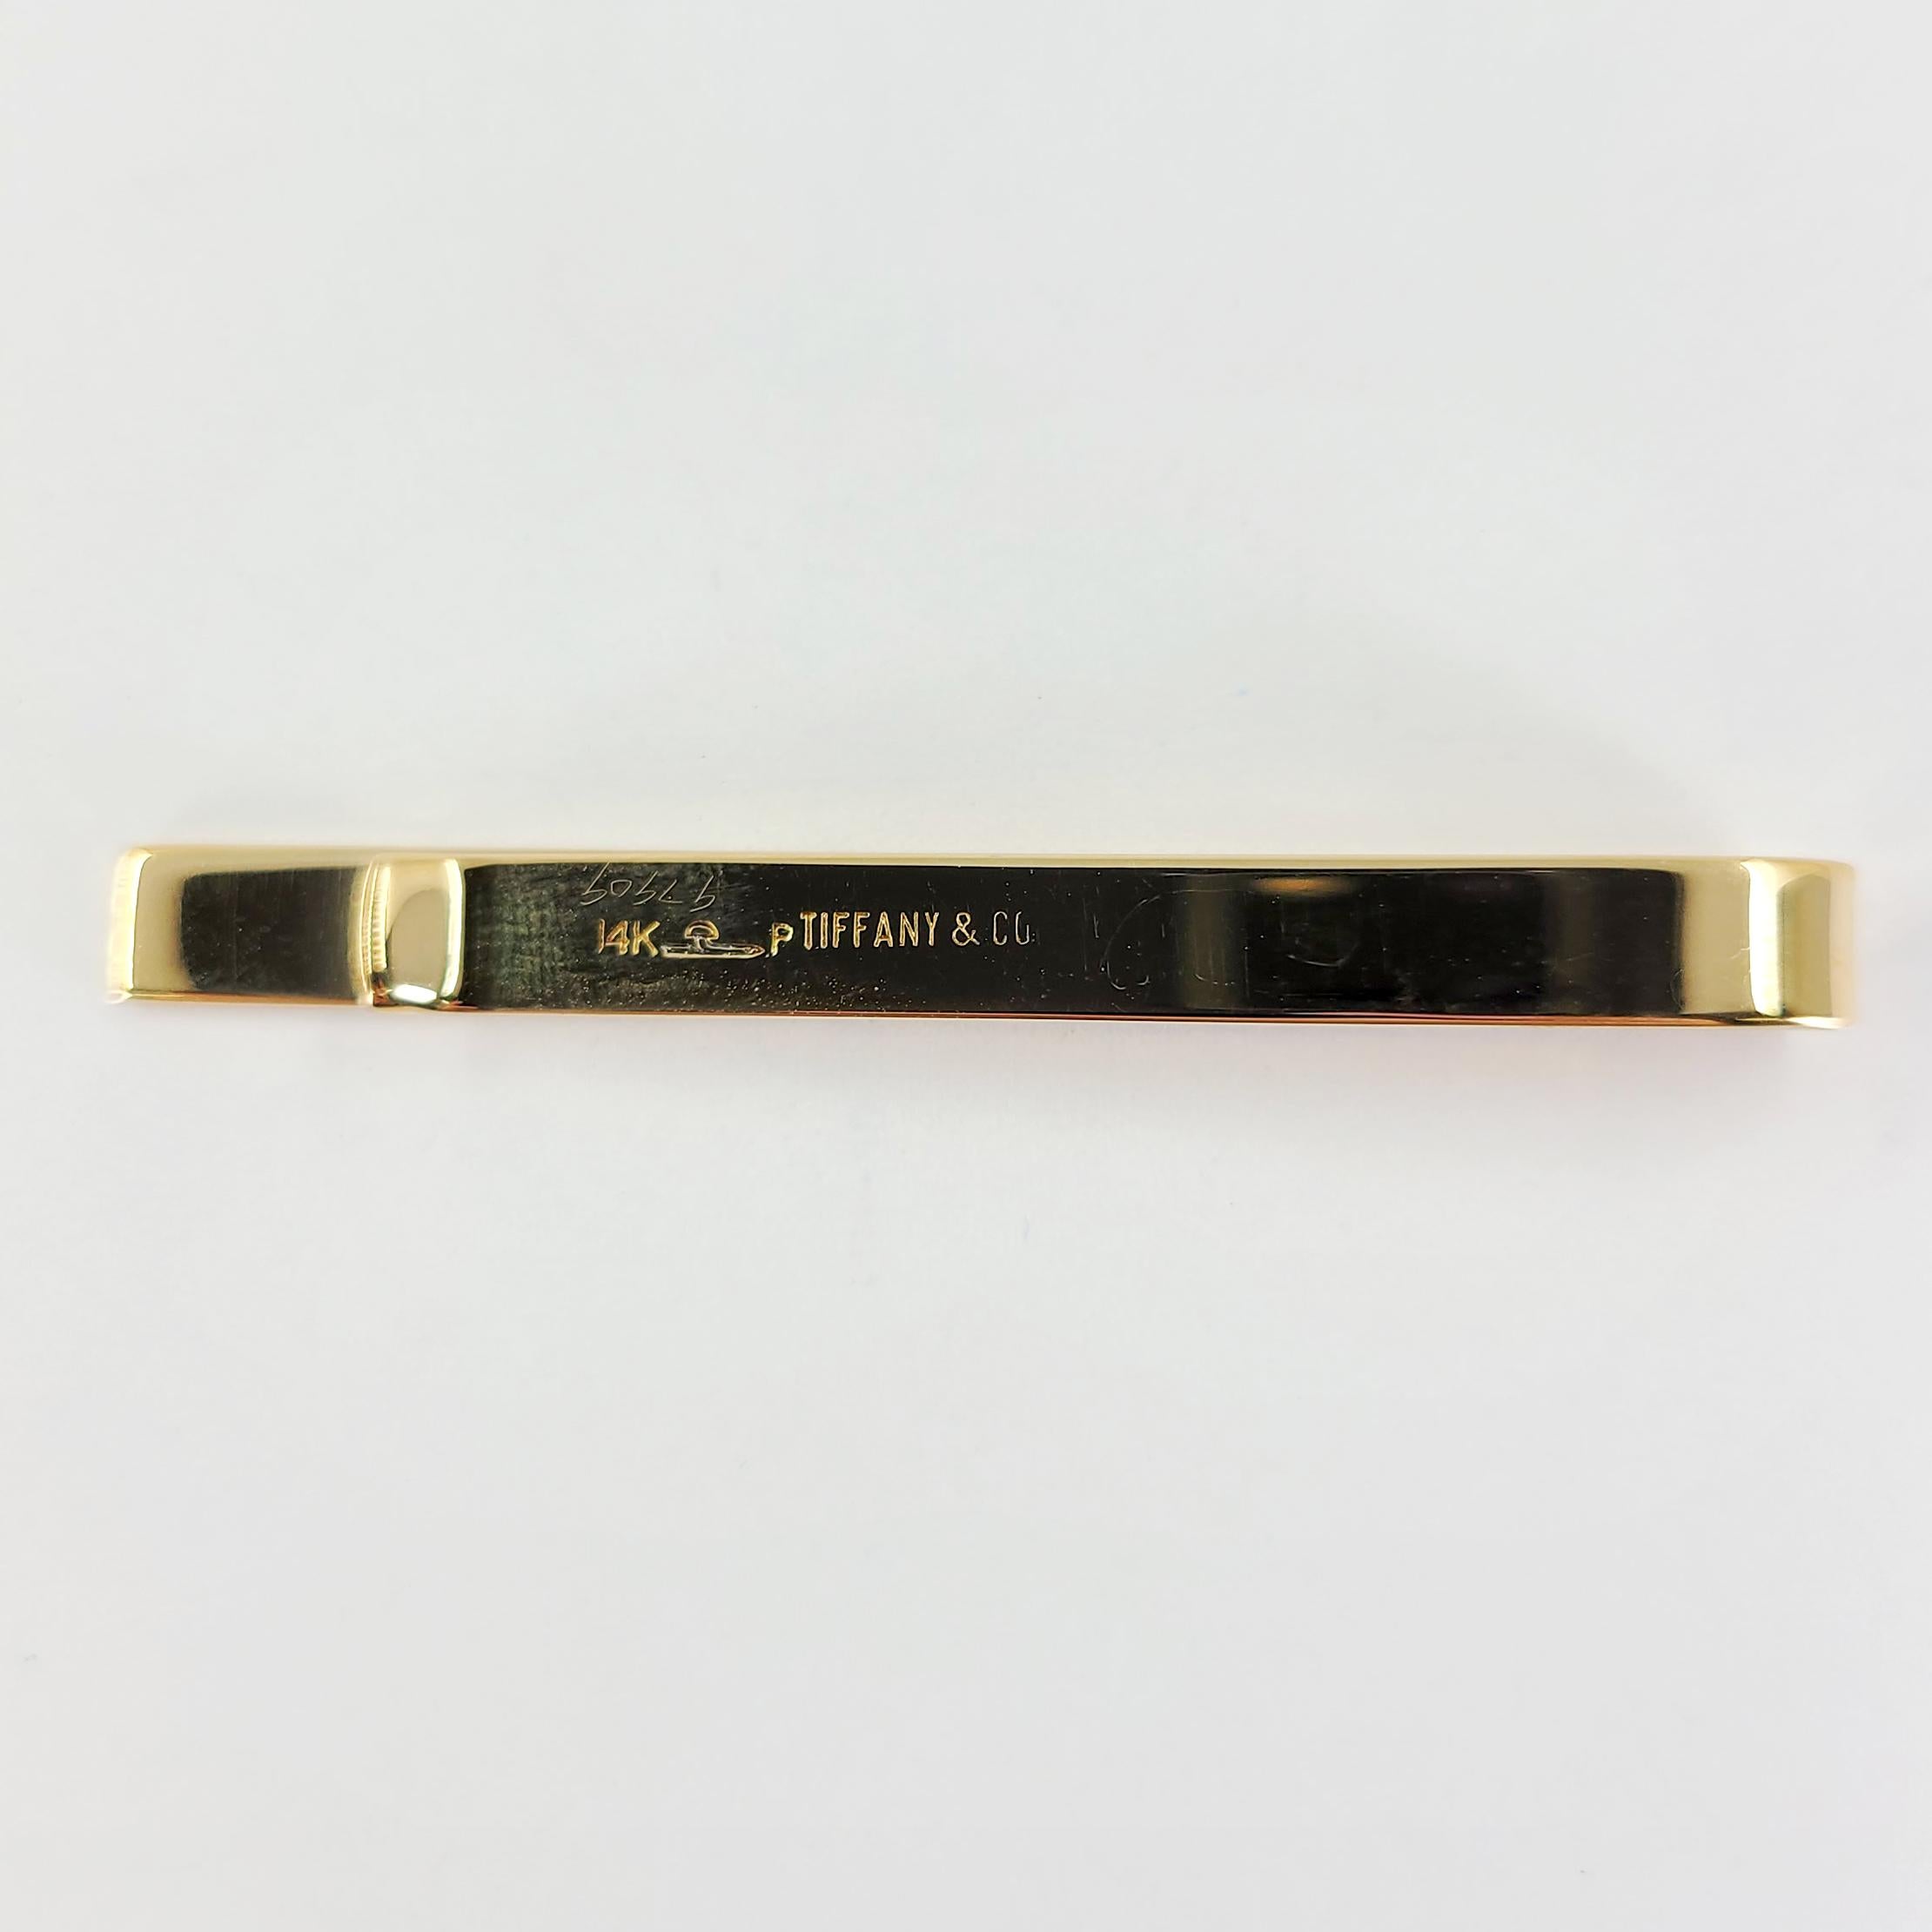 Tiffany & Co 14 Karat Yellow Gold Vintage Engravable Tie Bar. Finished Weight Is 7.4 Grams. 2 Inches Long.